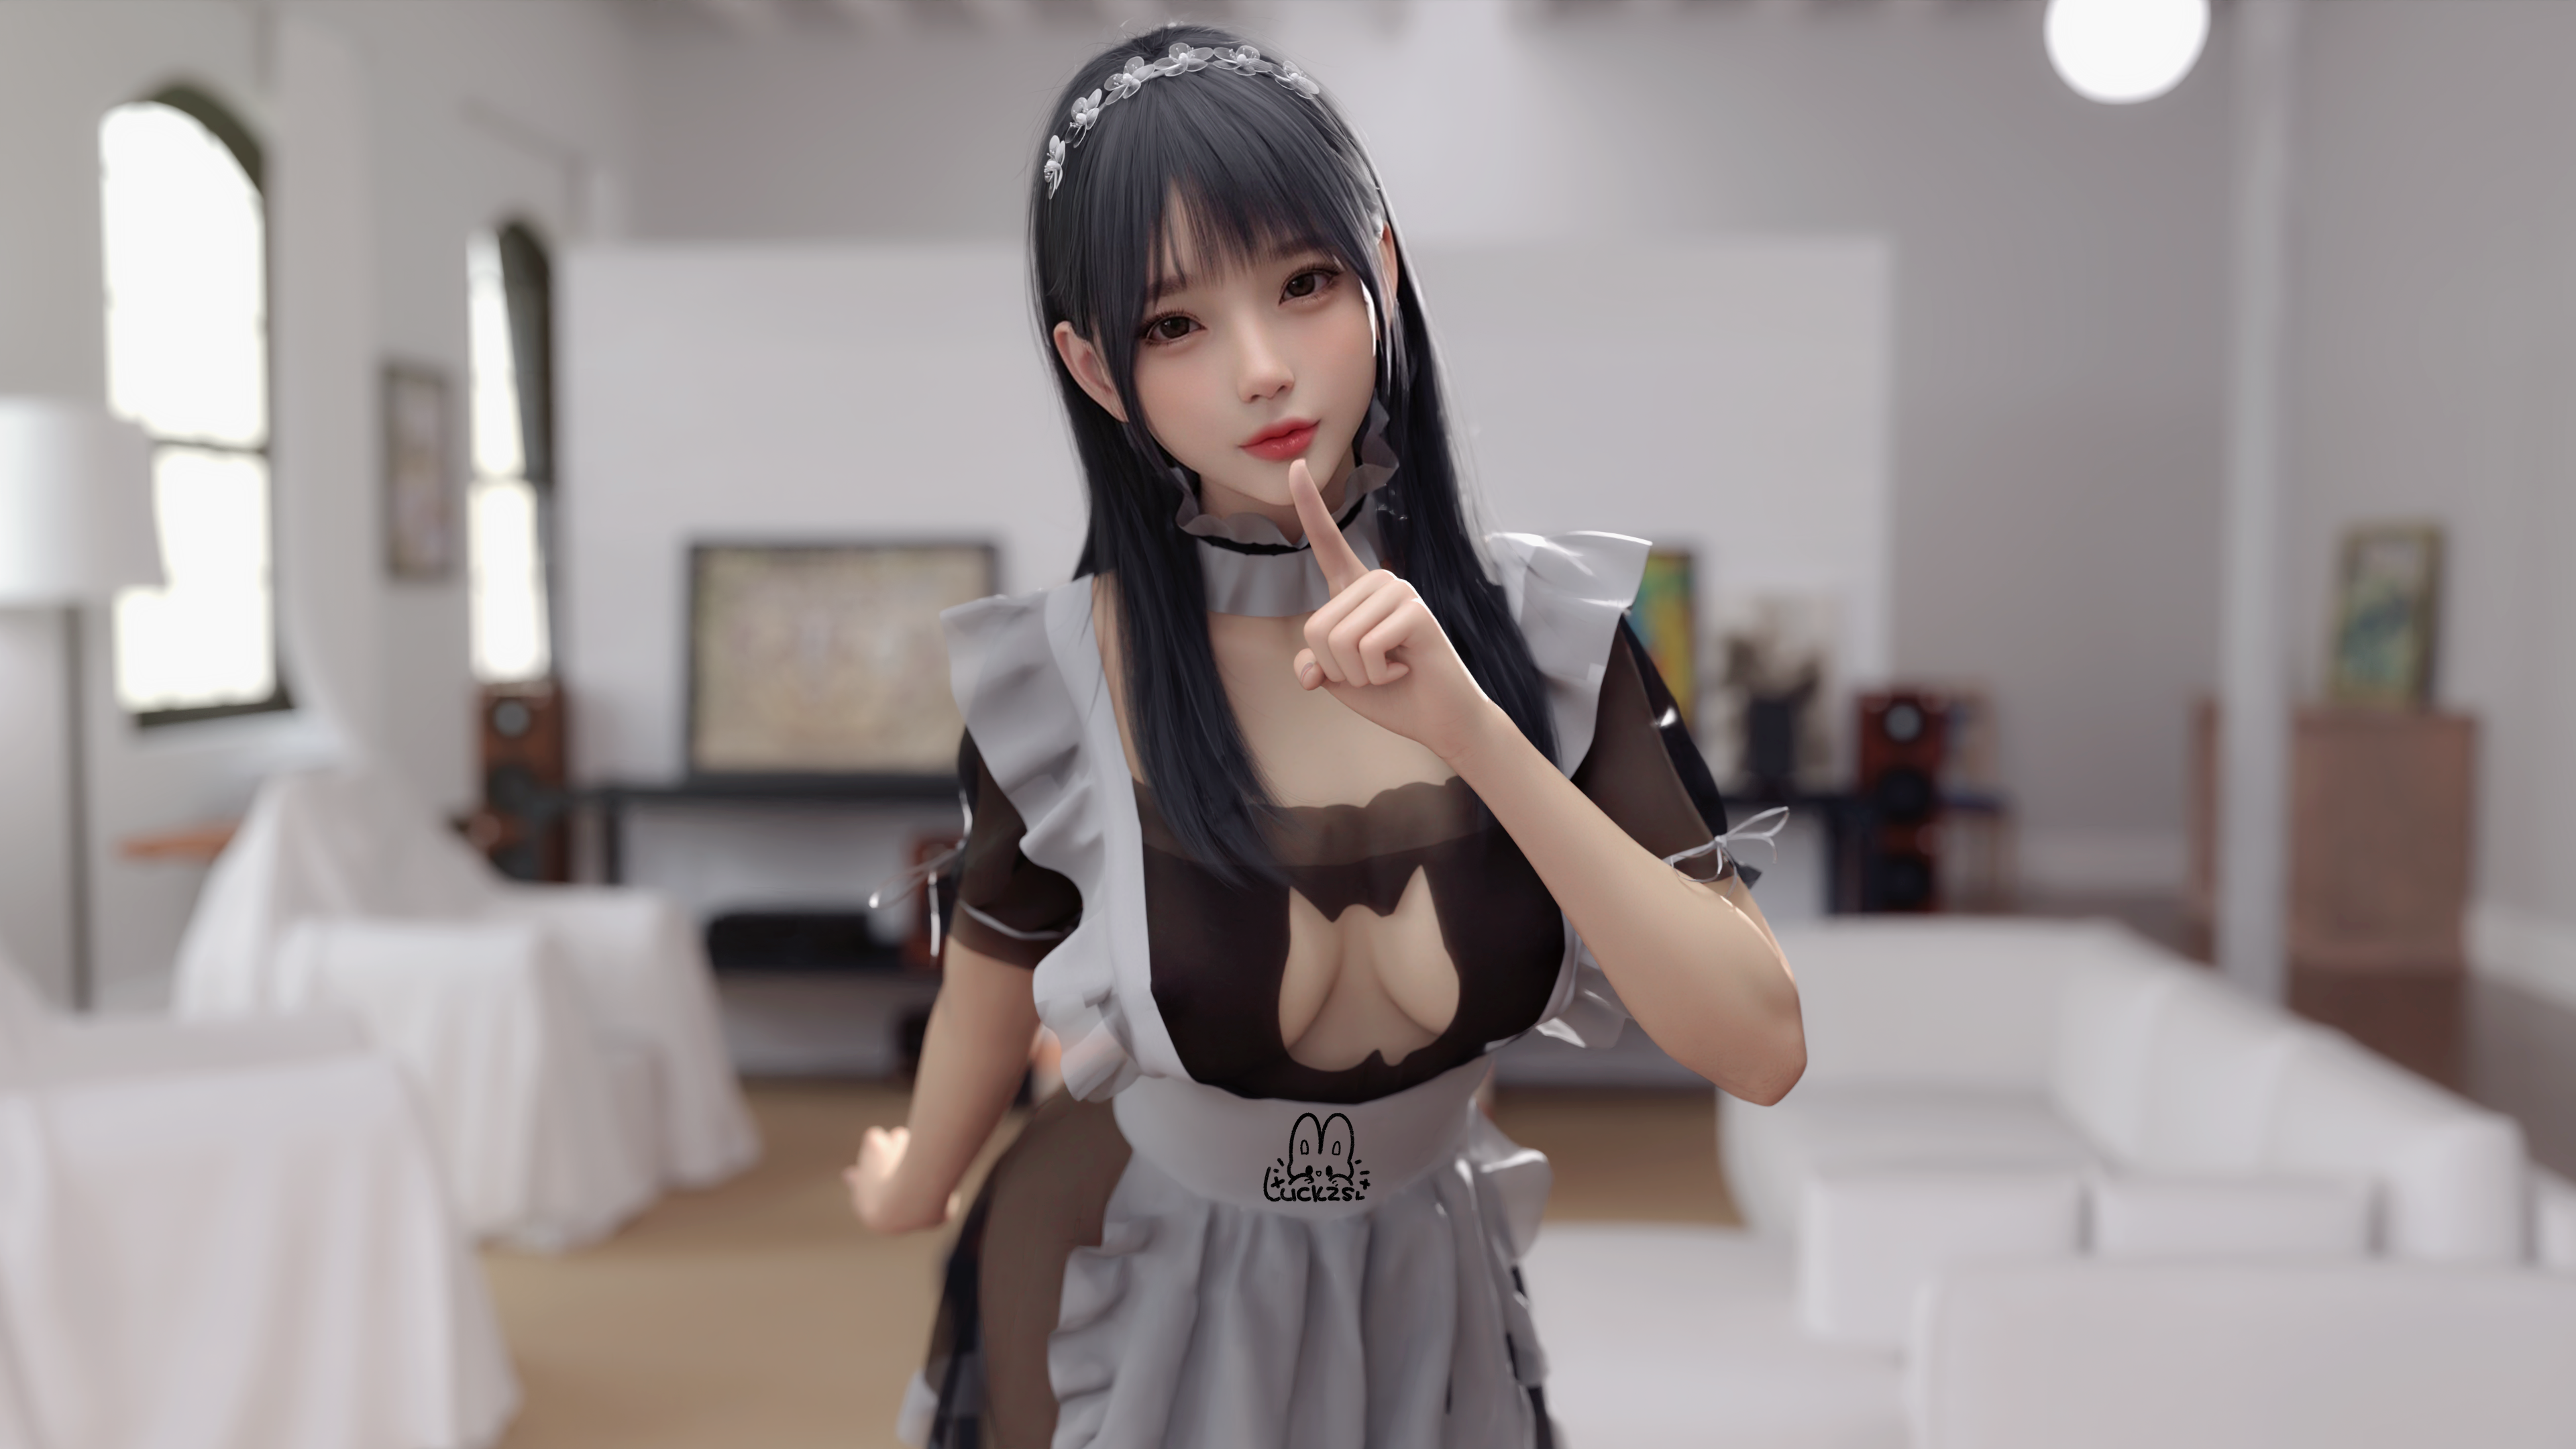 General 3840x2160 CGI cleavage Asian looking at viewer Luck zs maid maid outfit depth of field digital art women indoors long hair aegyo sal